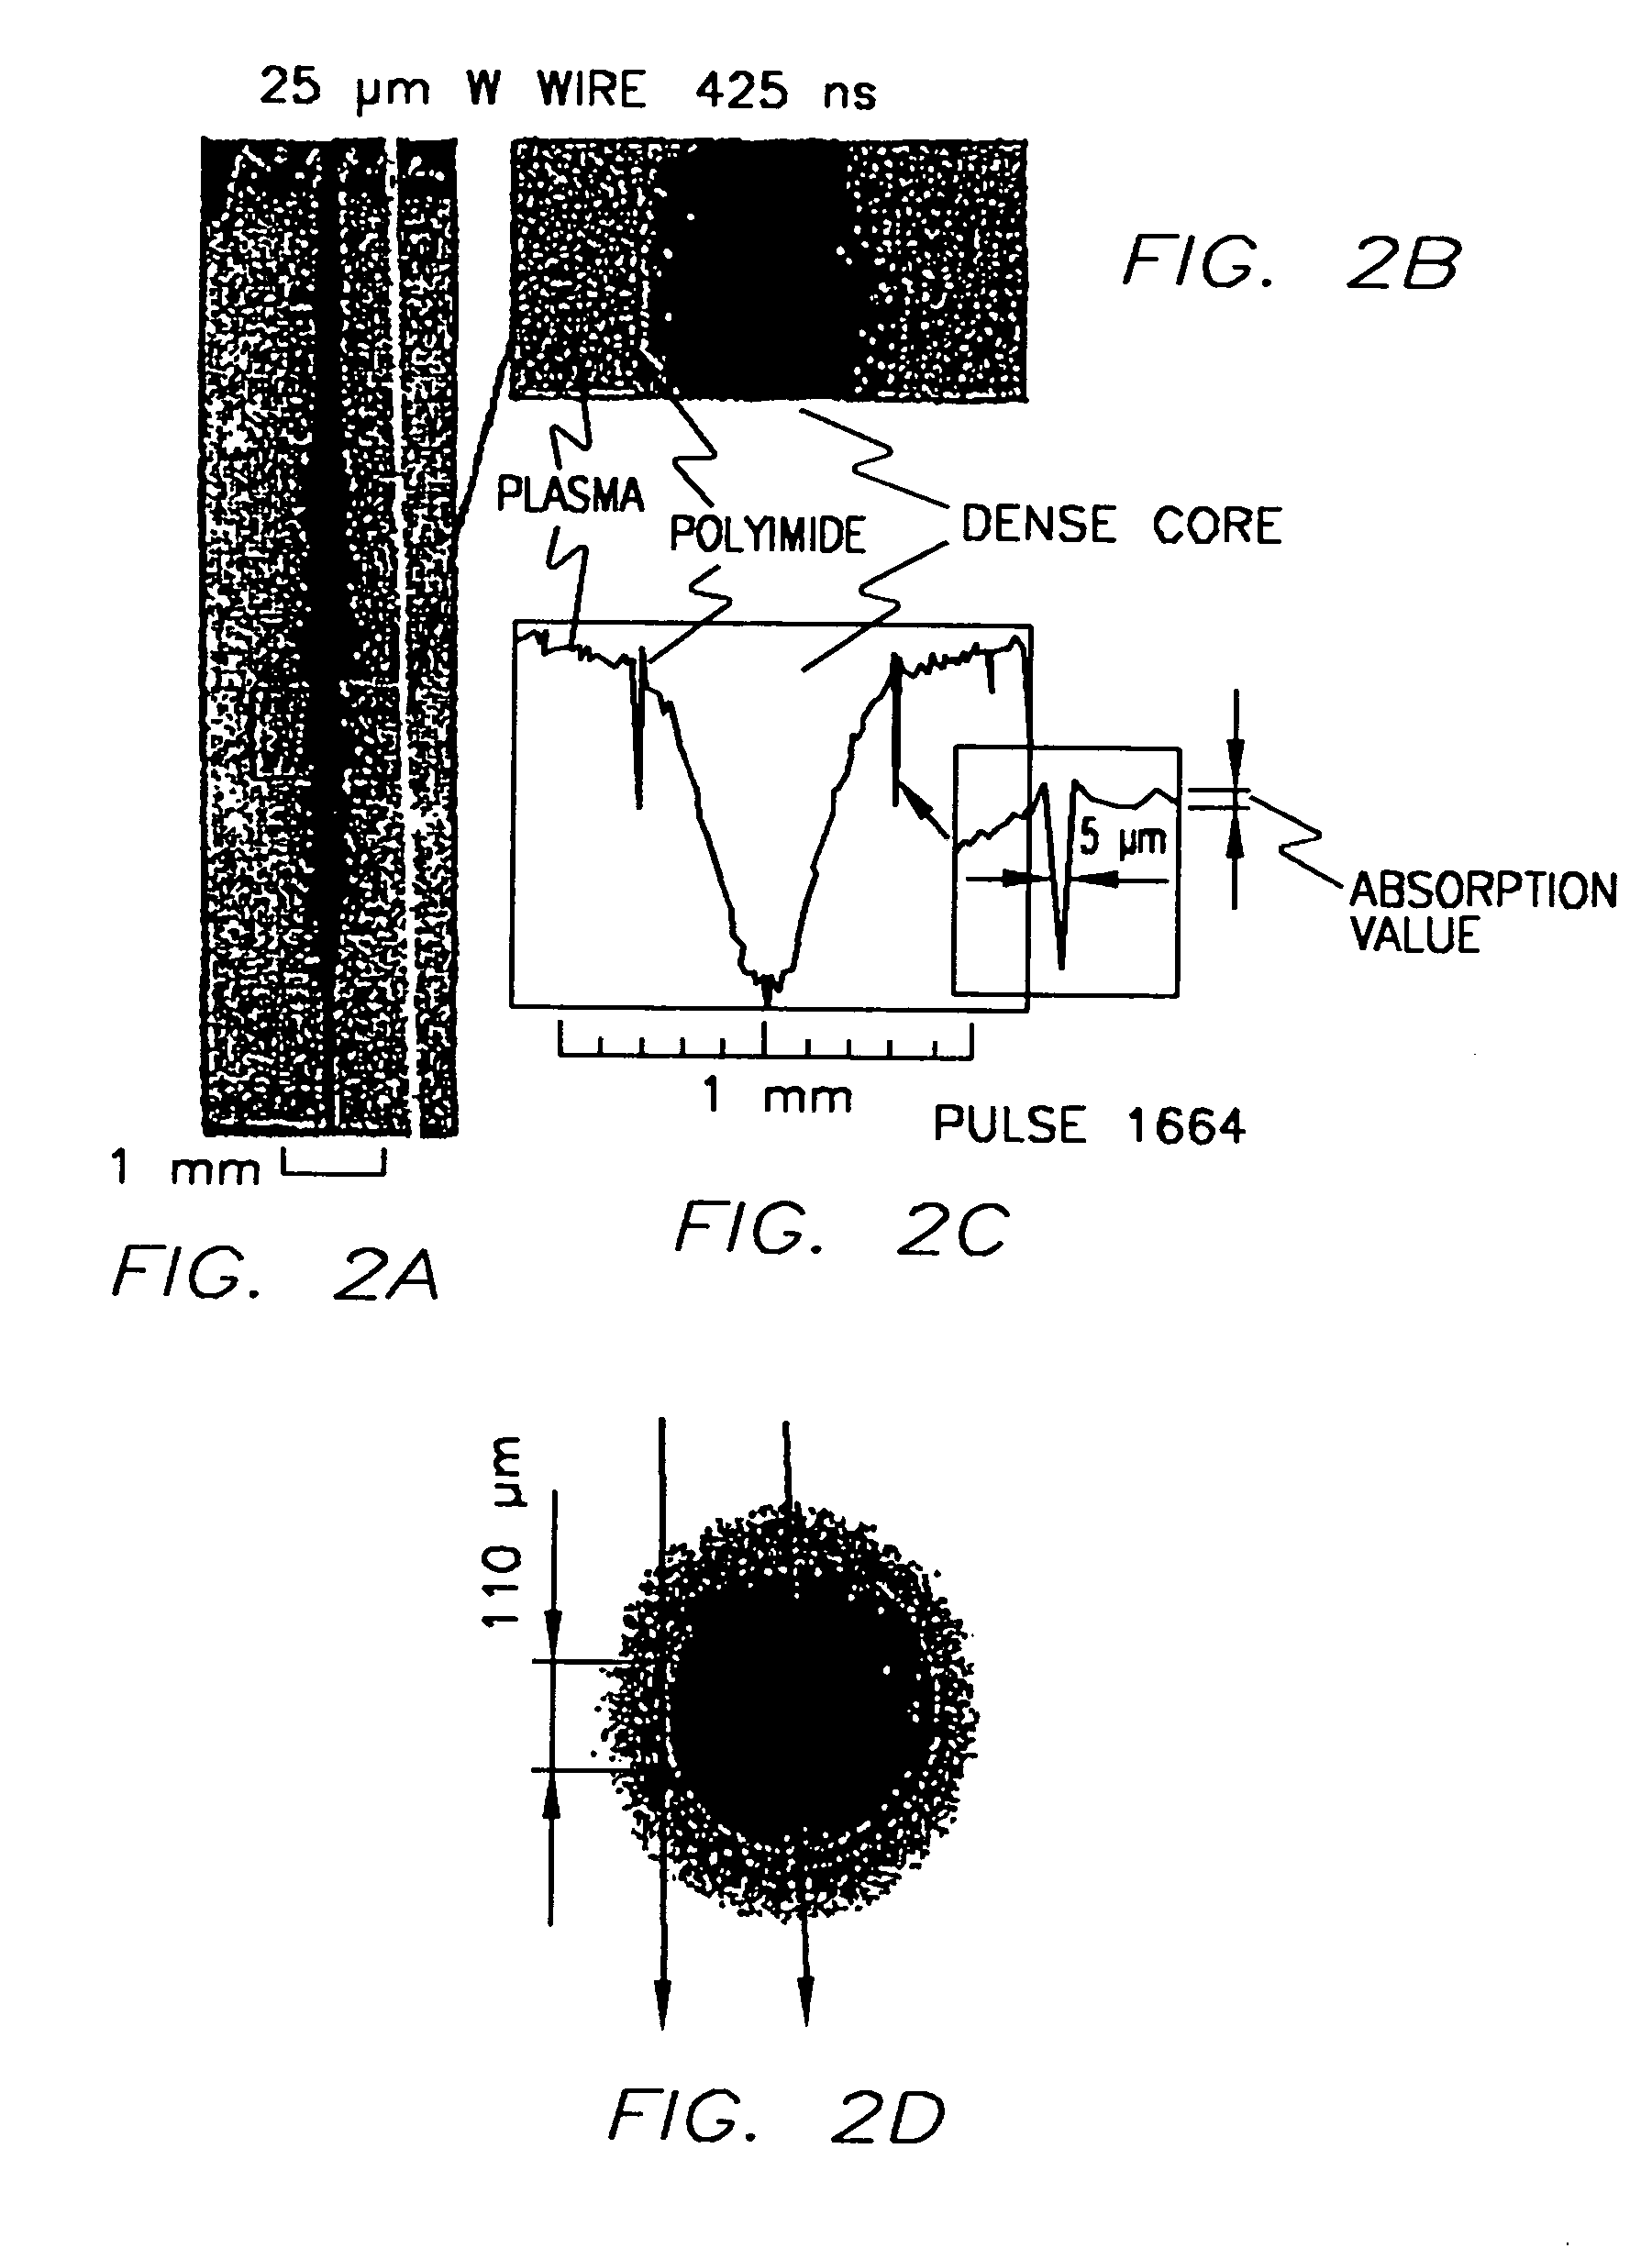 System for phase-contrast x-ray radiography using X pinch radiation and a method thereof